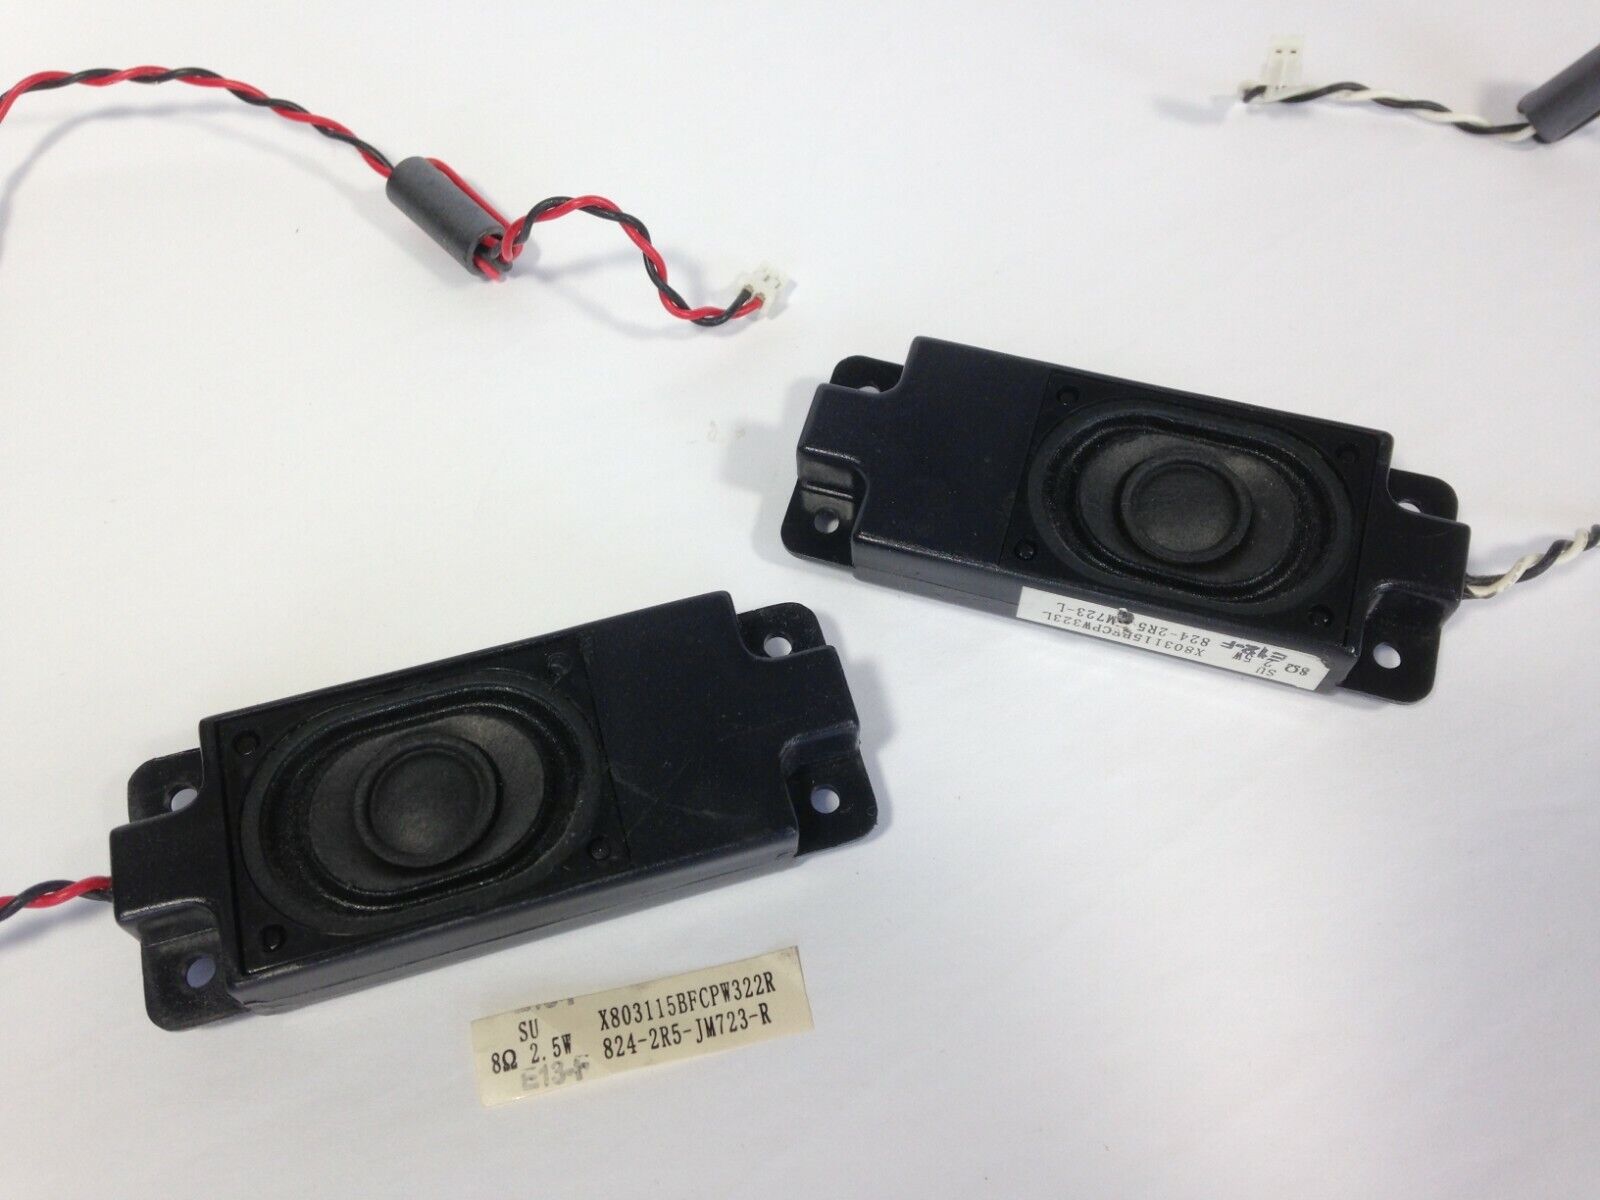 Pair of Small Internal Speakers from a Computer Monitor - 8 Ohms / 2.5 W